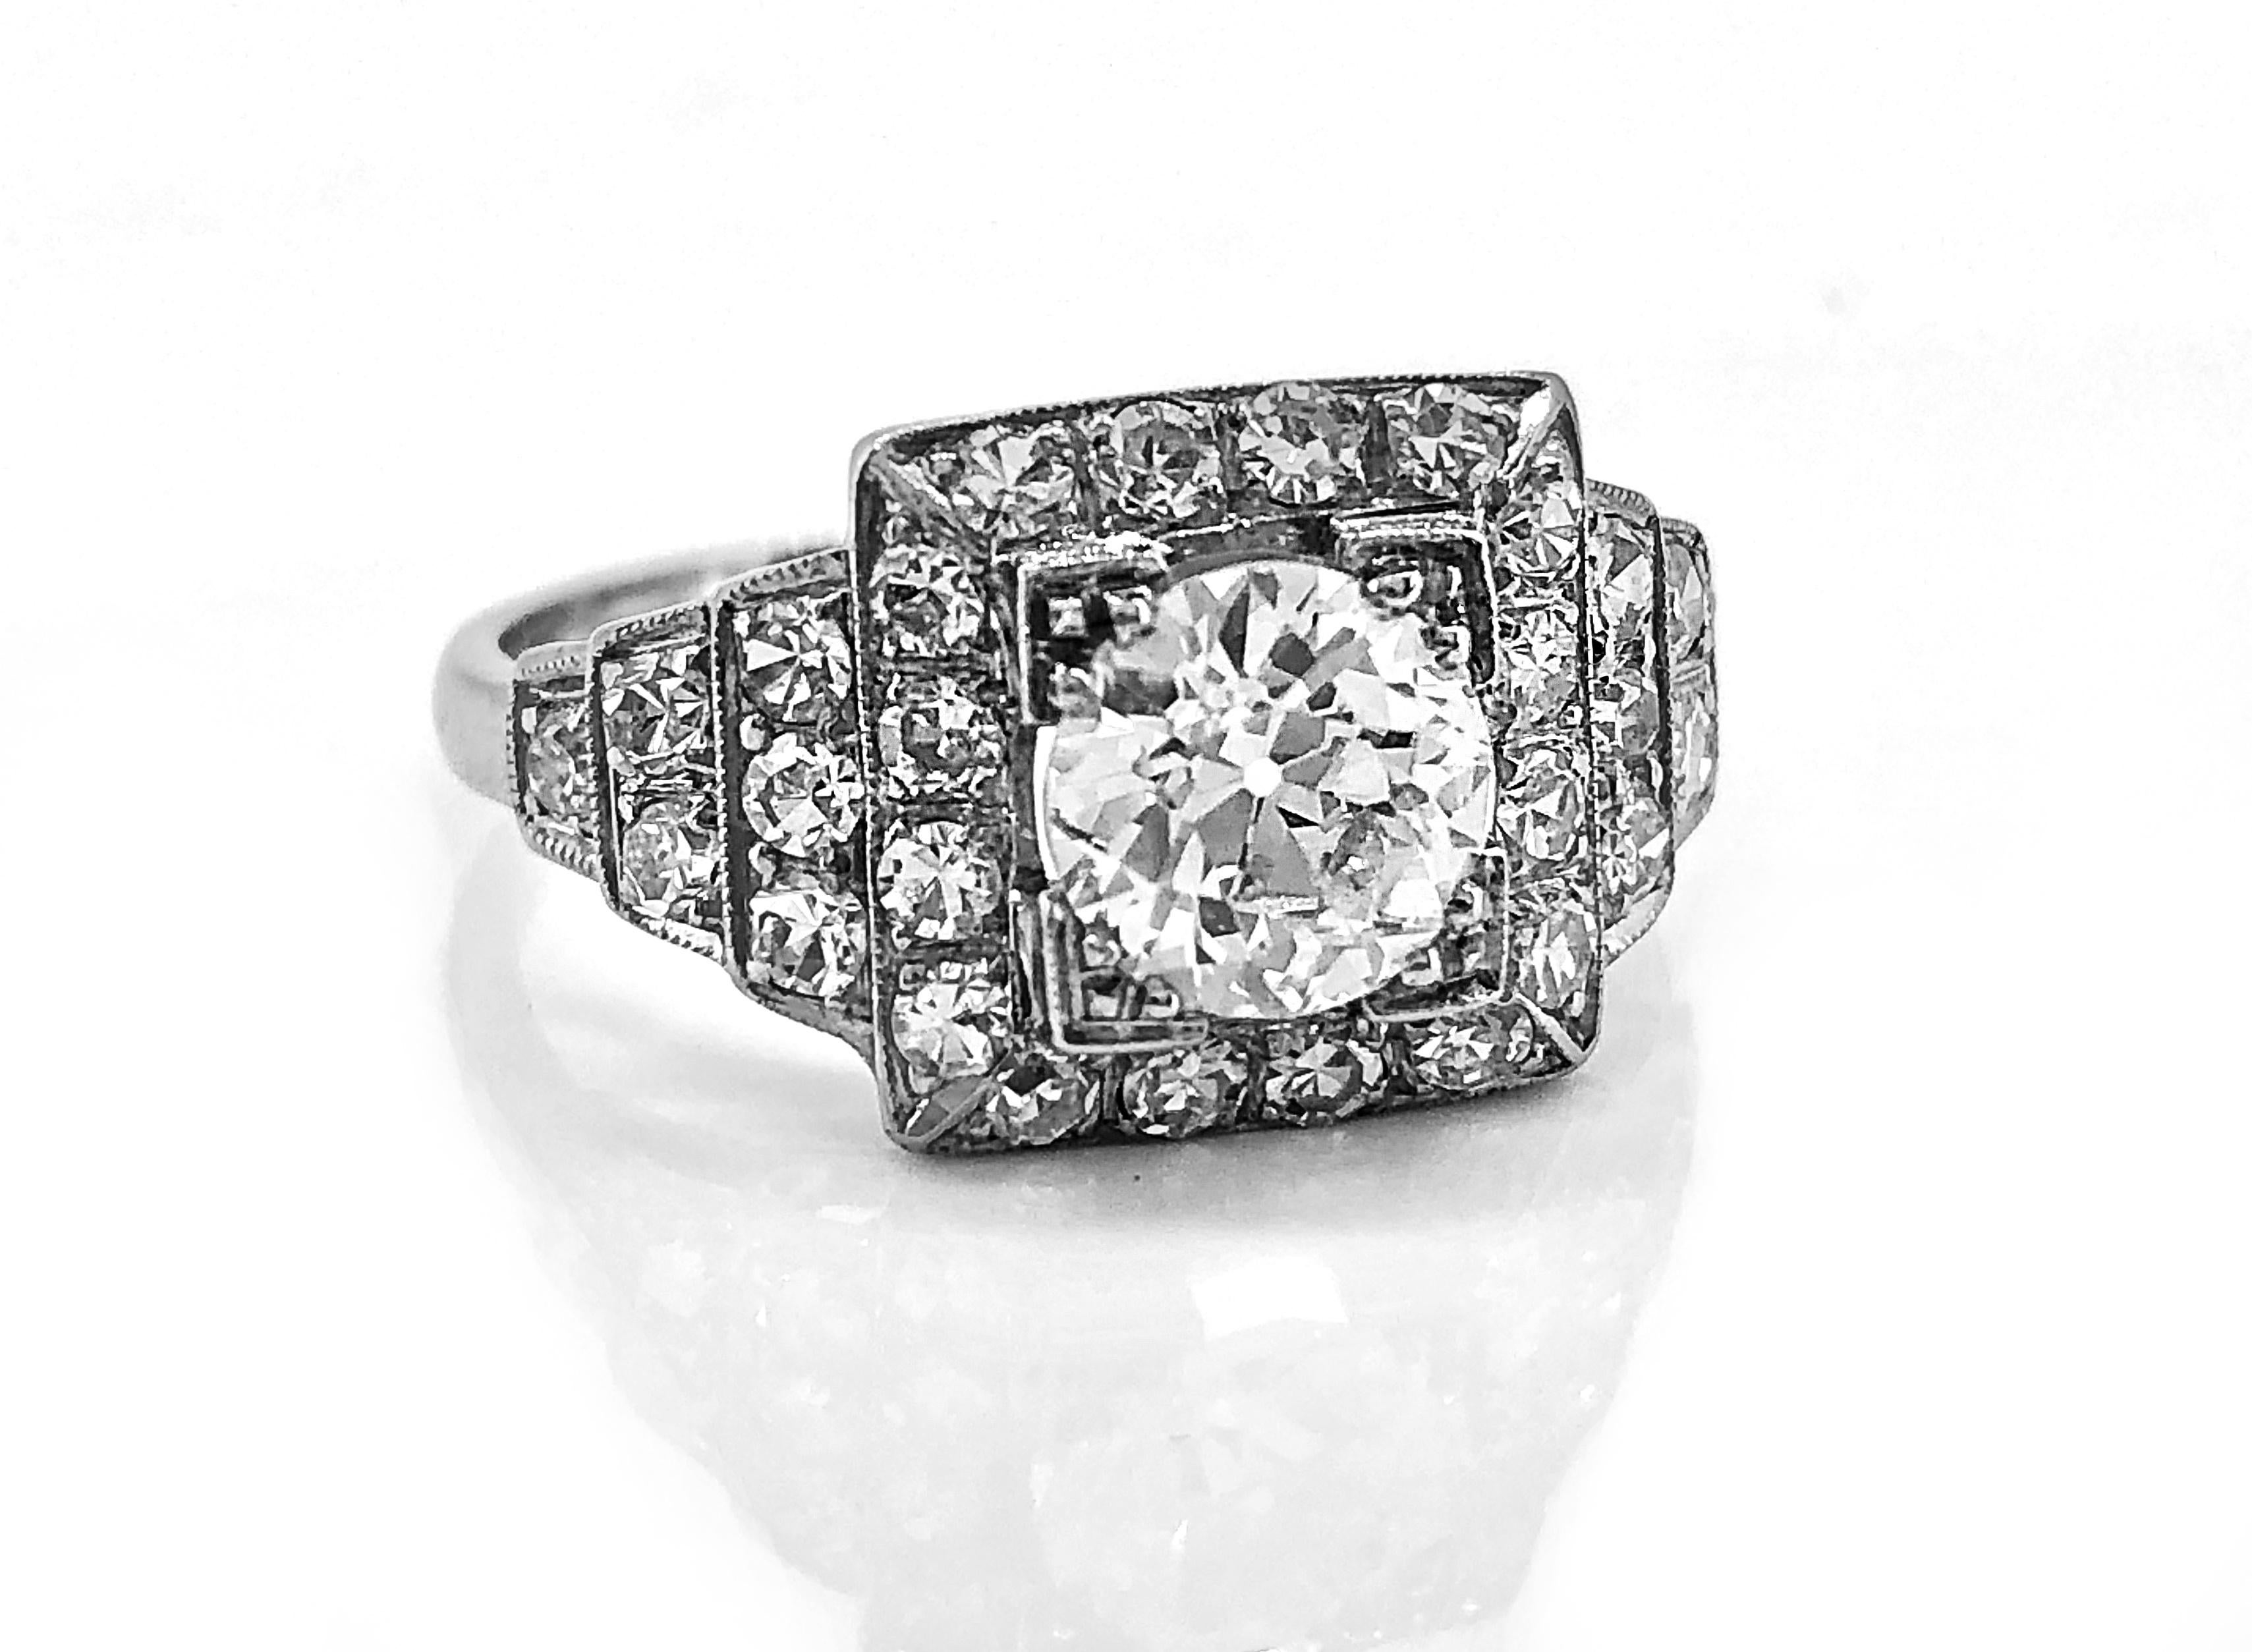 A beautifully designed and very eye appealing antique engagement ring, this square format is highlighted by a .94ct. apx. European cut diamond. The diamond is of excellent H color and VS2 clarity. The ring is further enhanced by .75ct. T.W. apx. of